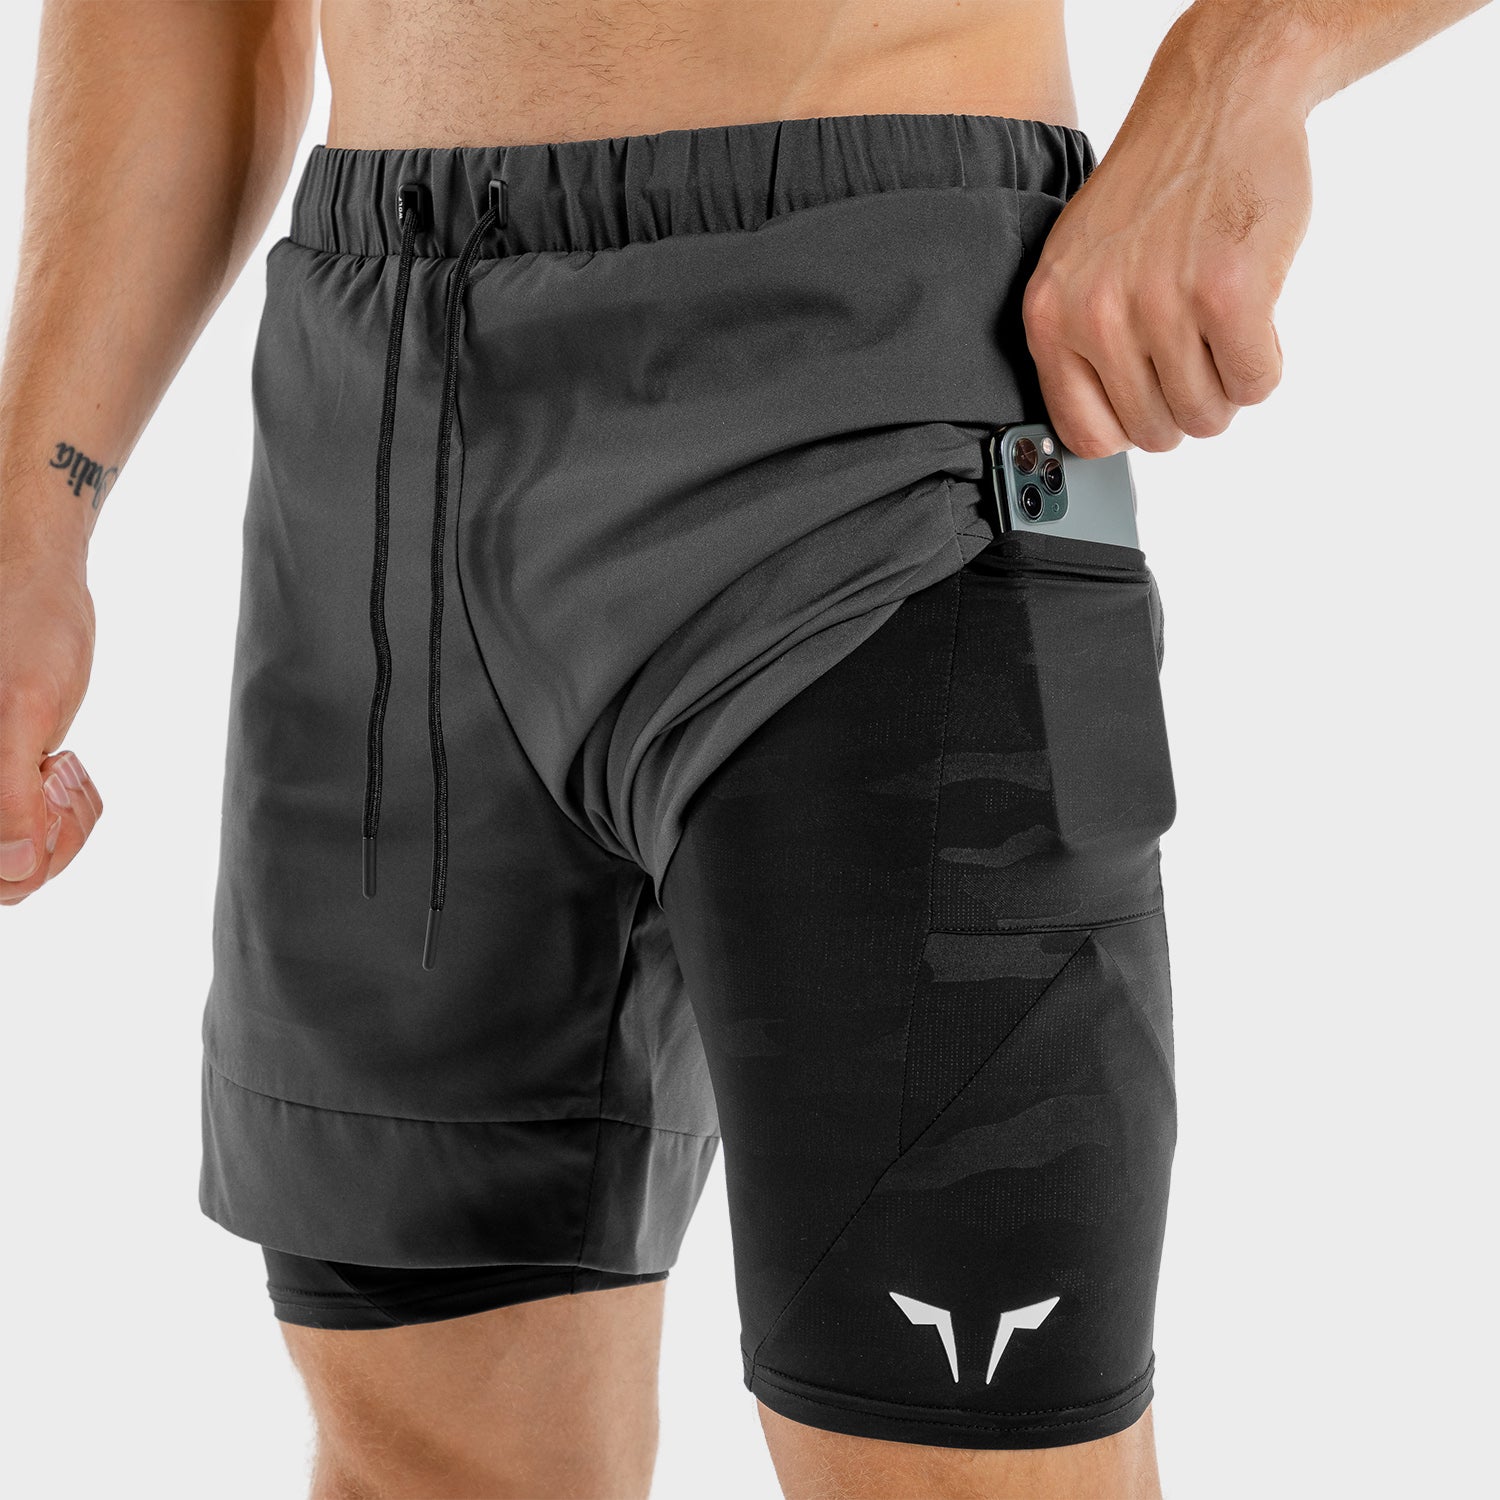 Limitless 2-in-1 Shorts - Light Grey